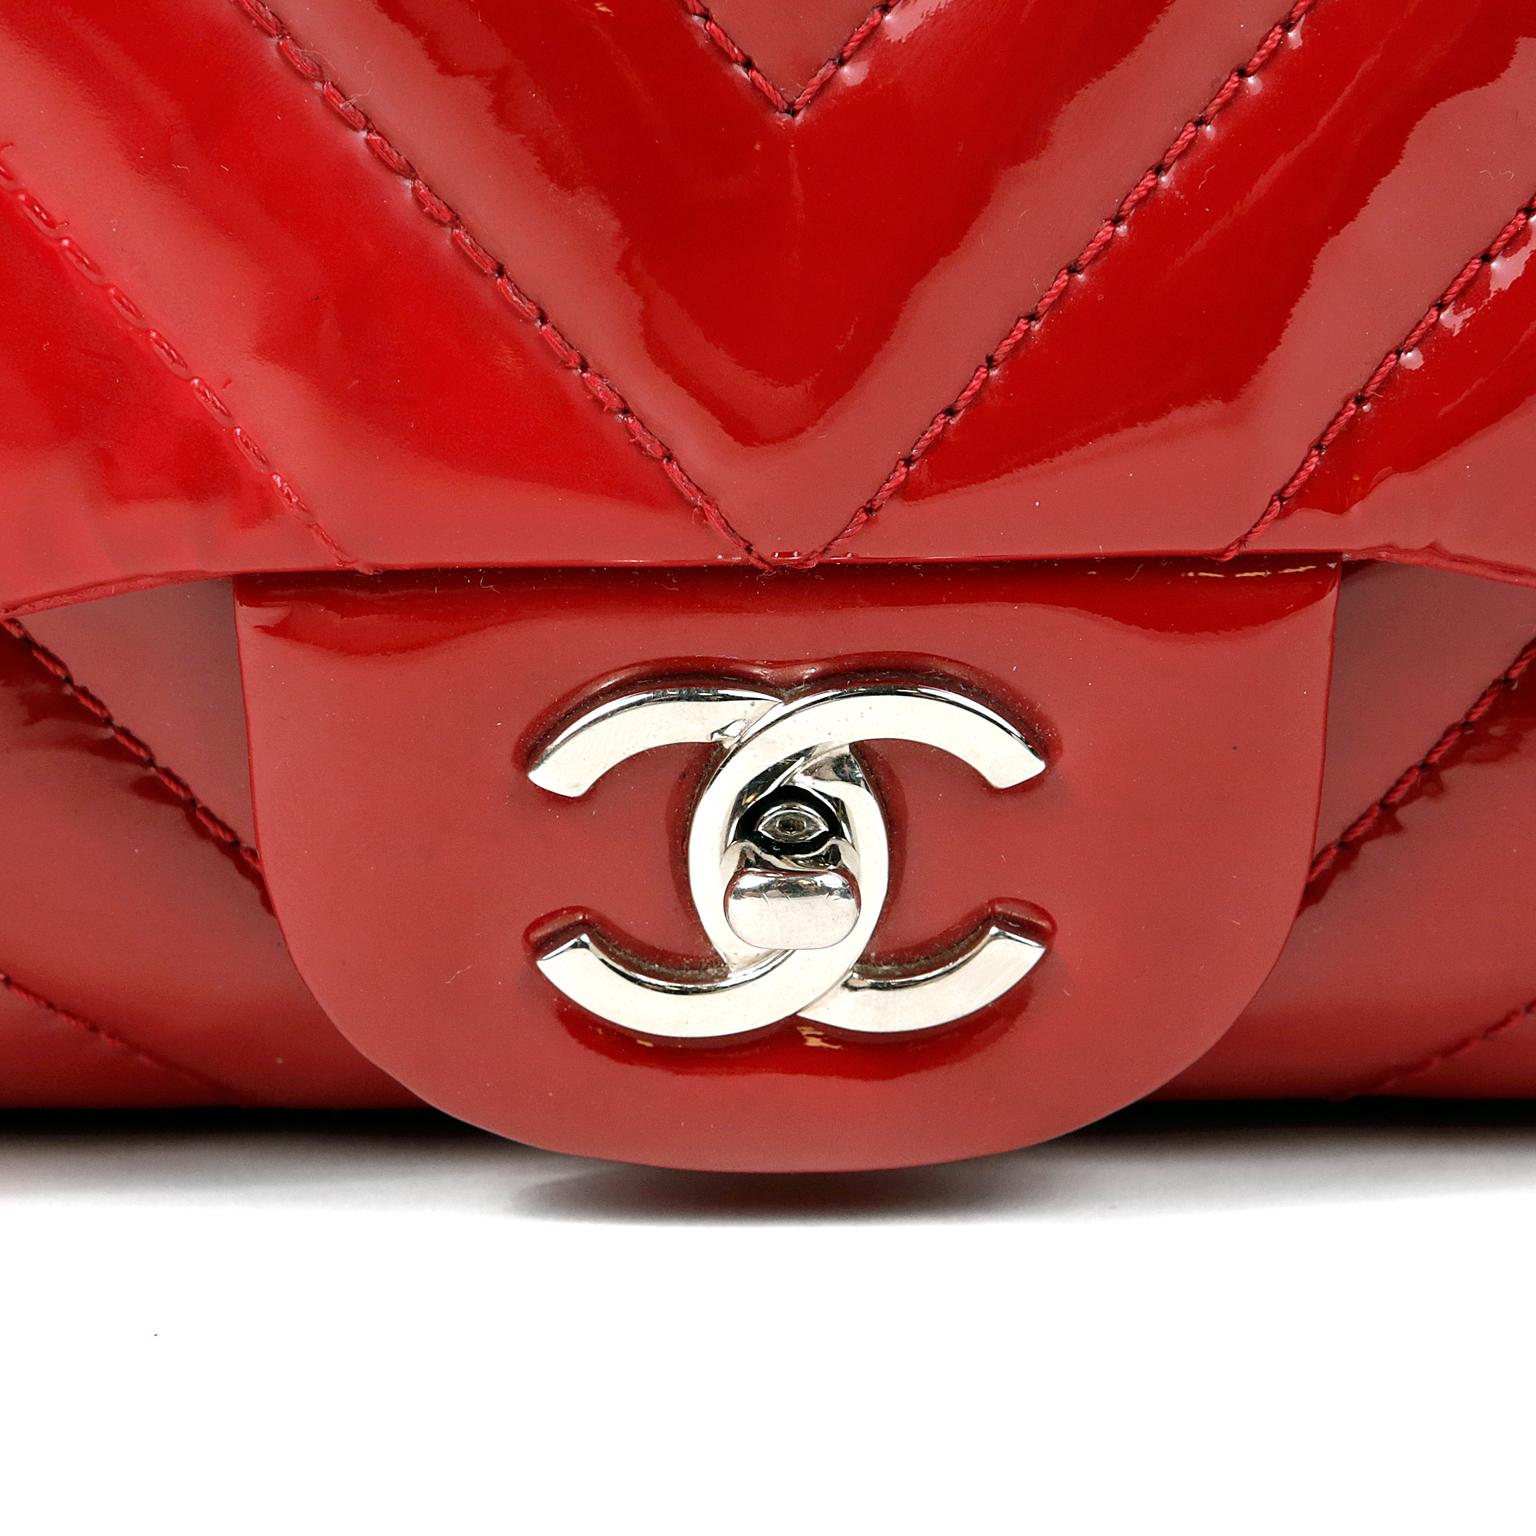 Women's Chanel Red Patent Leather Jumbo Chevron Flap Bag with Silver Hardware